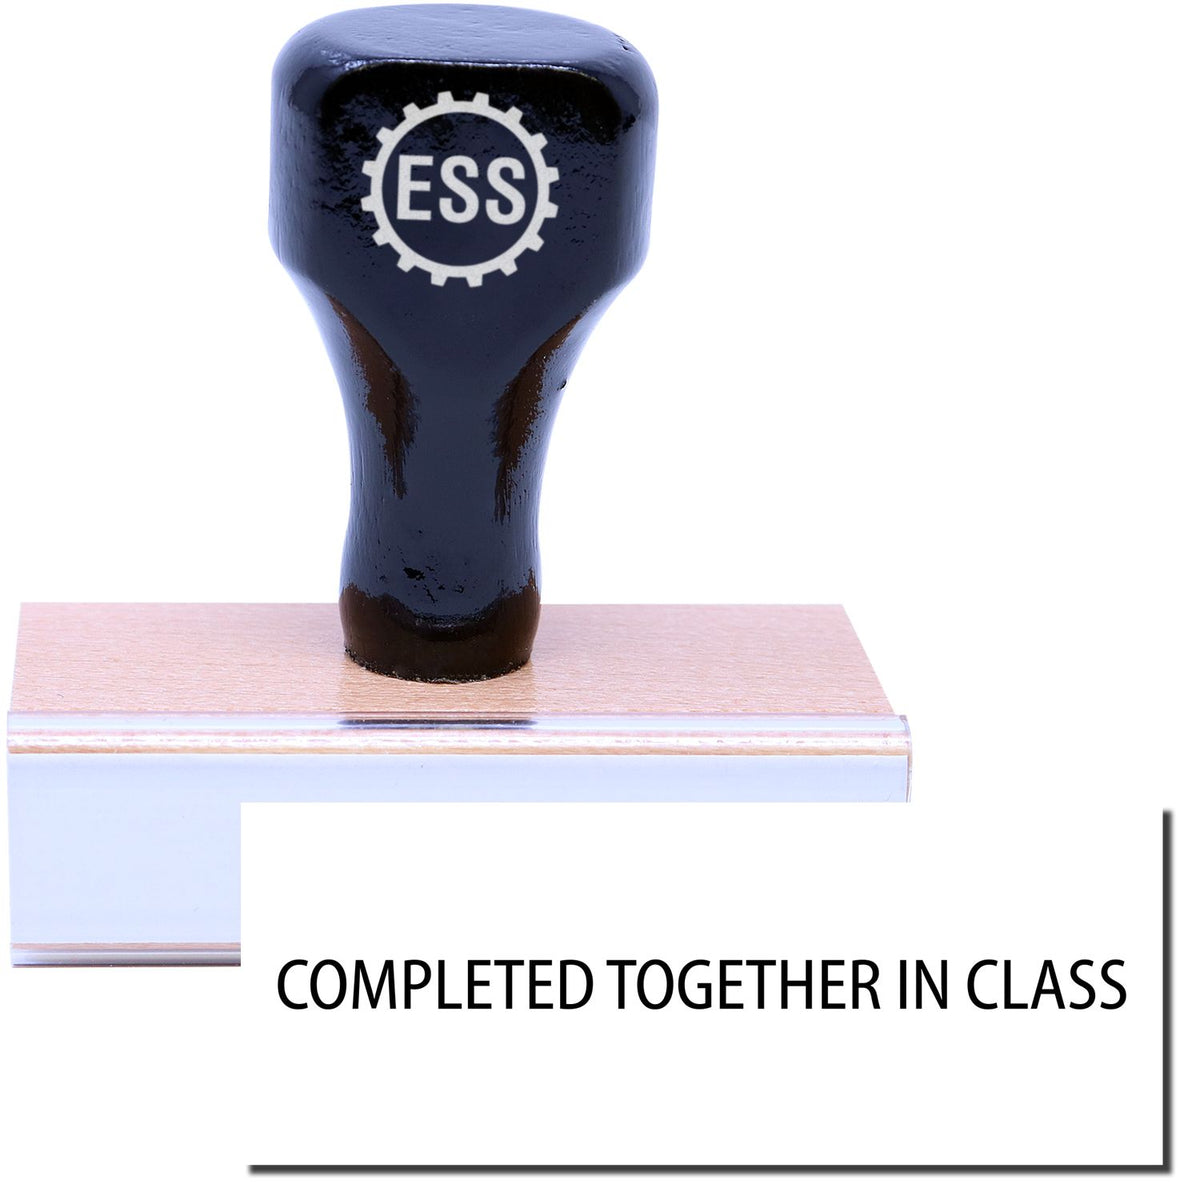 A stock office rubber stamp with a stamped image showing how the text &quot;COMPLETED TOGETHER IN CLASS&quot; is displayed after stamping.